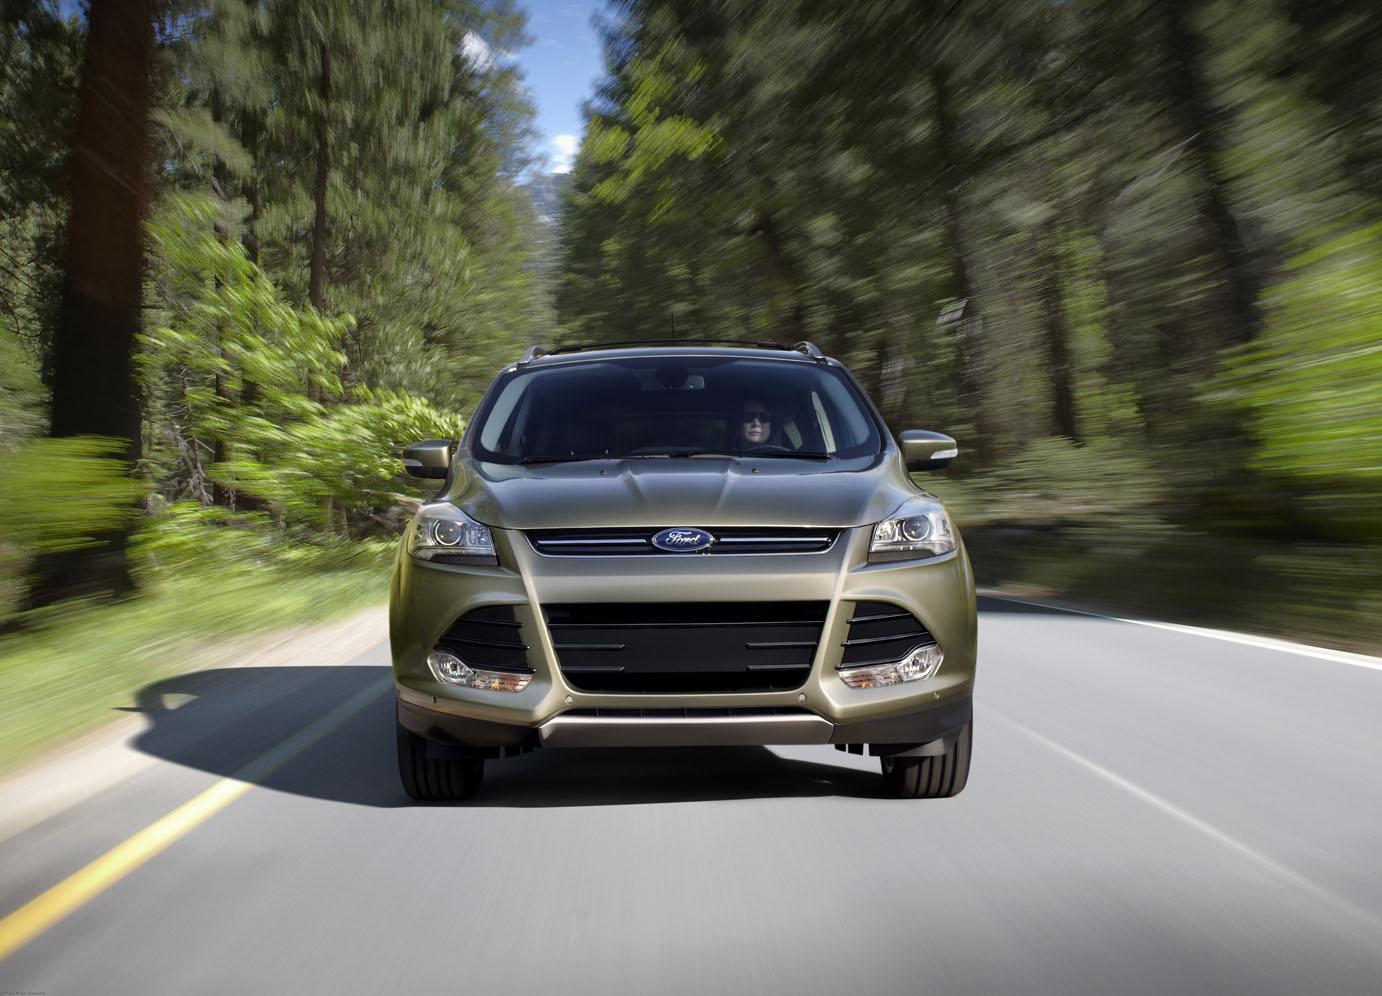 Ford Kuga/Escape PHEV: Here's What We Love and Hate After 12,000 Miles